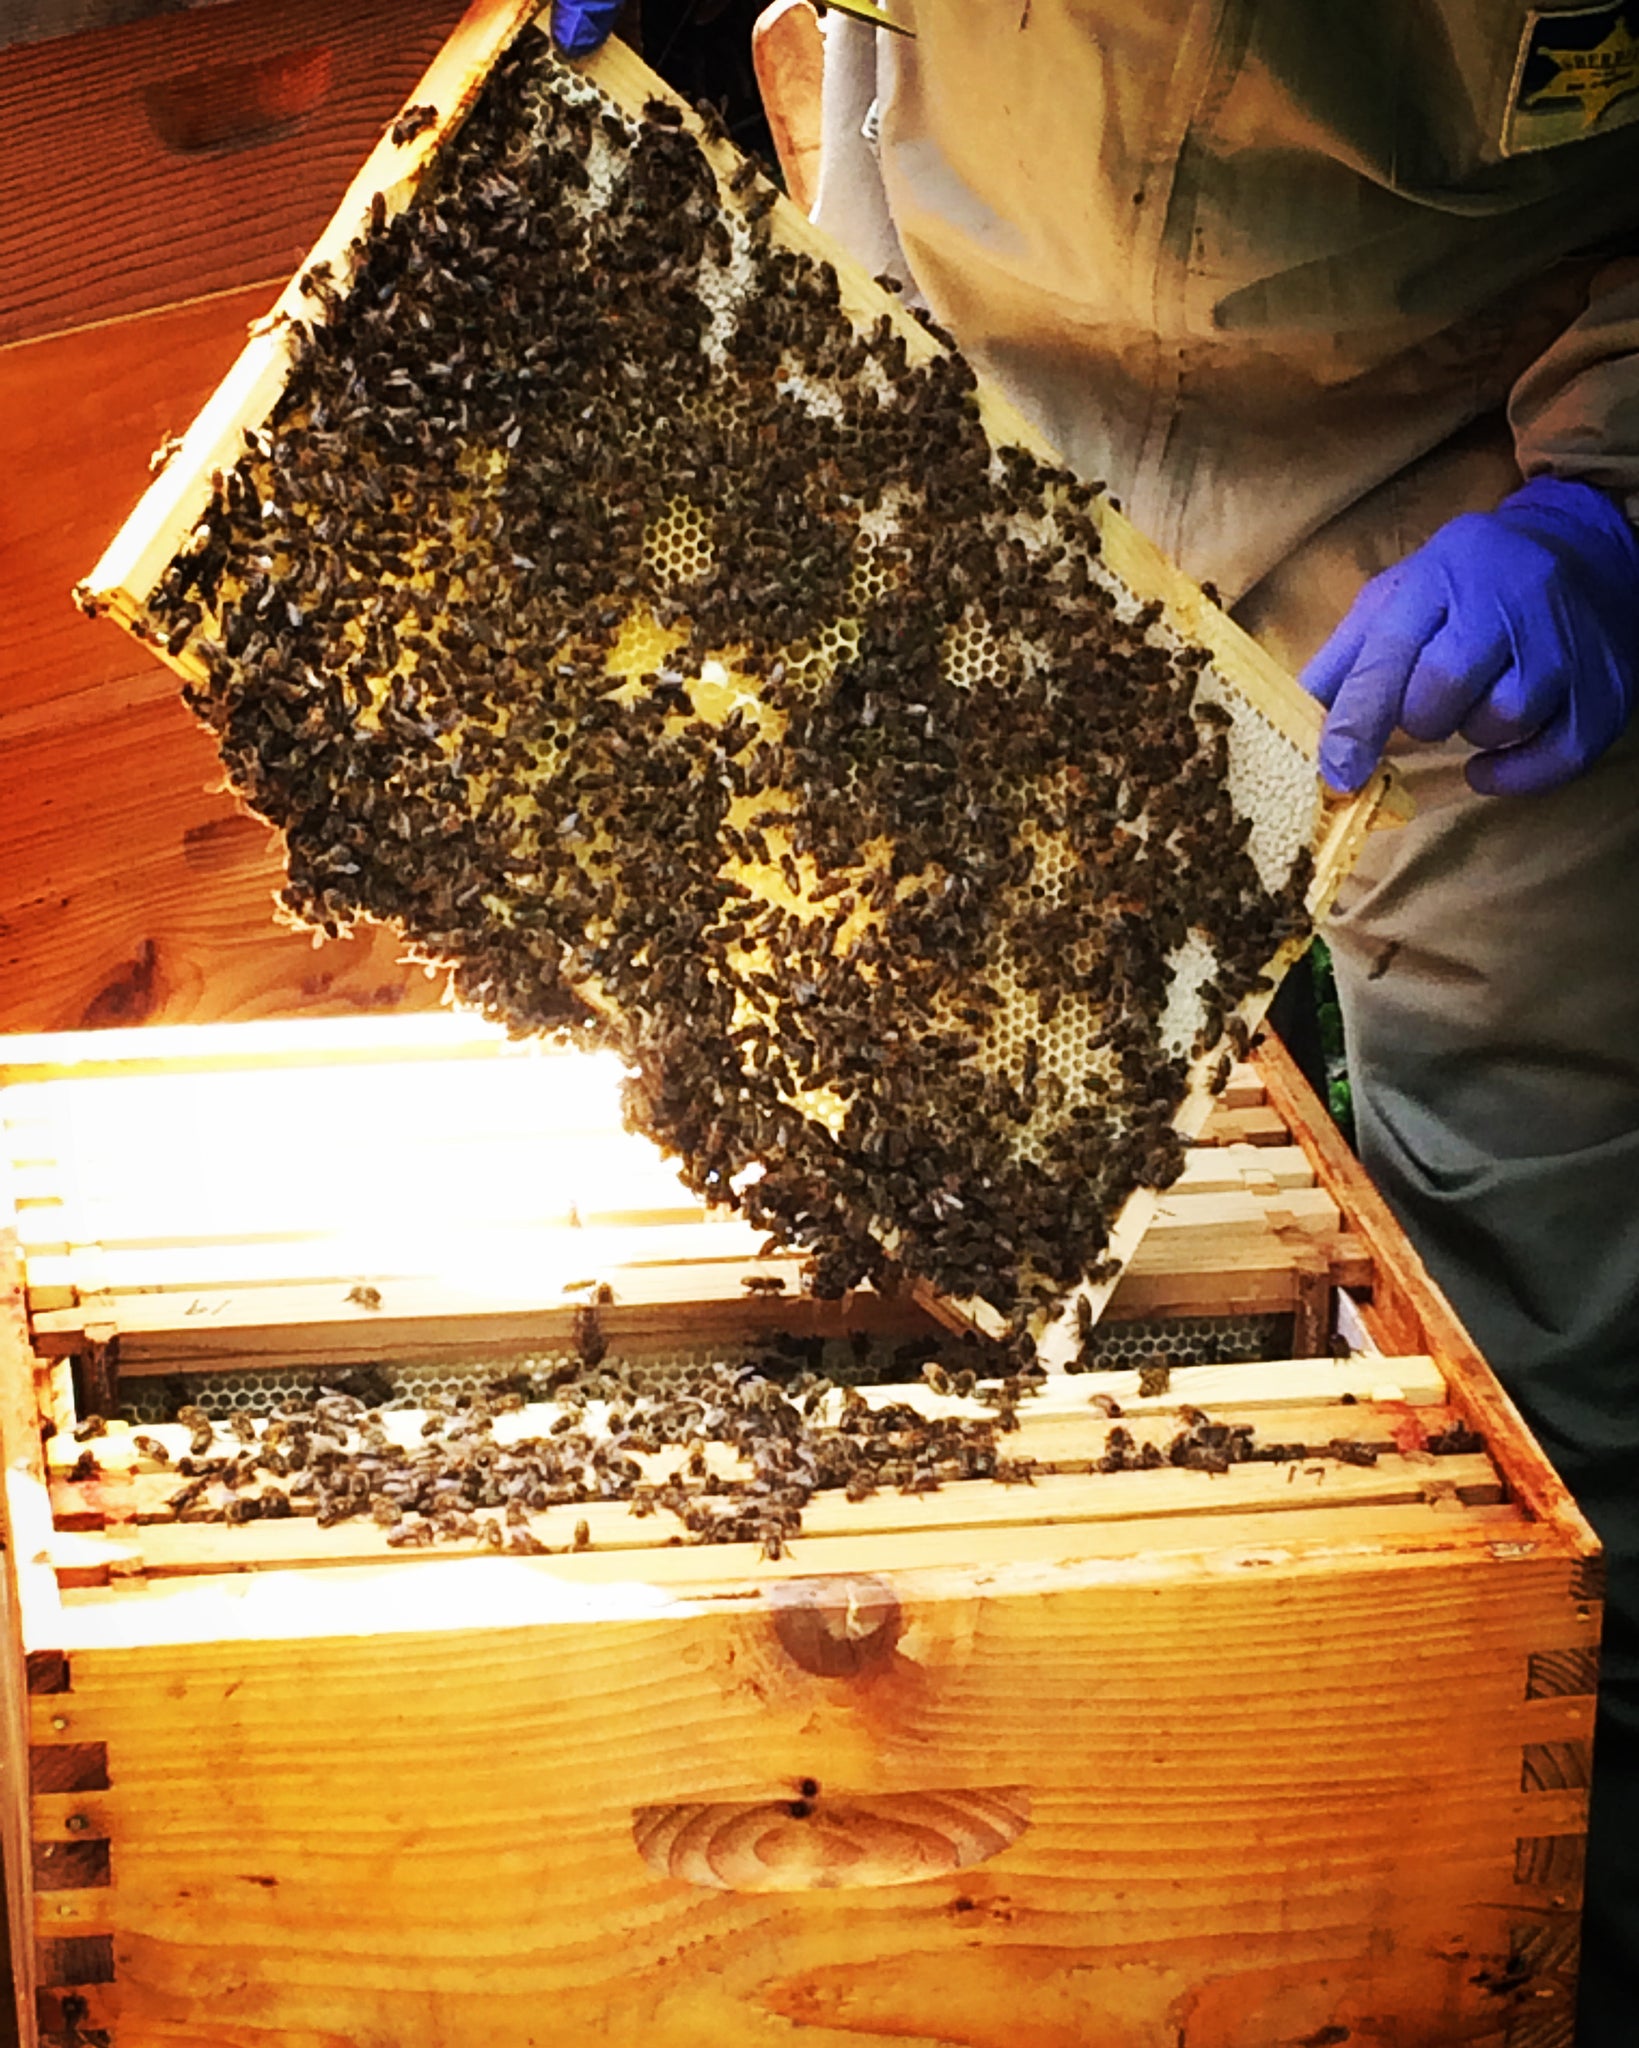 Epping Good Honey Tasting and Masterclass April 25th 7:30pm